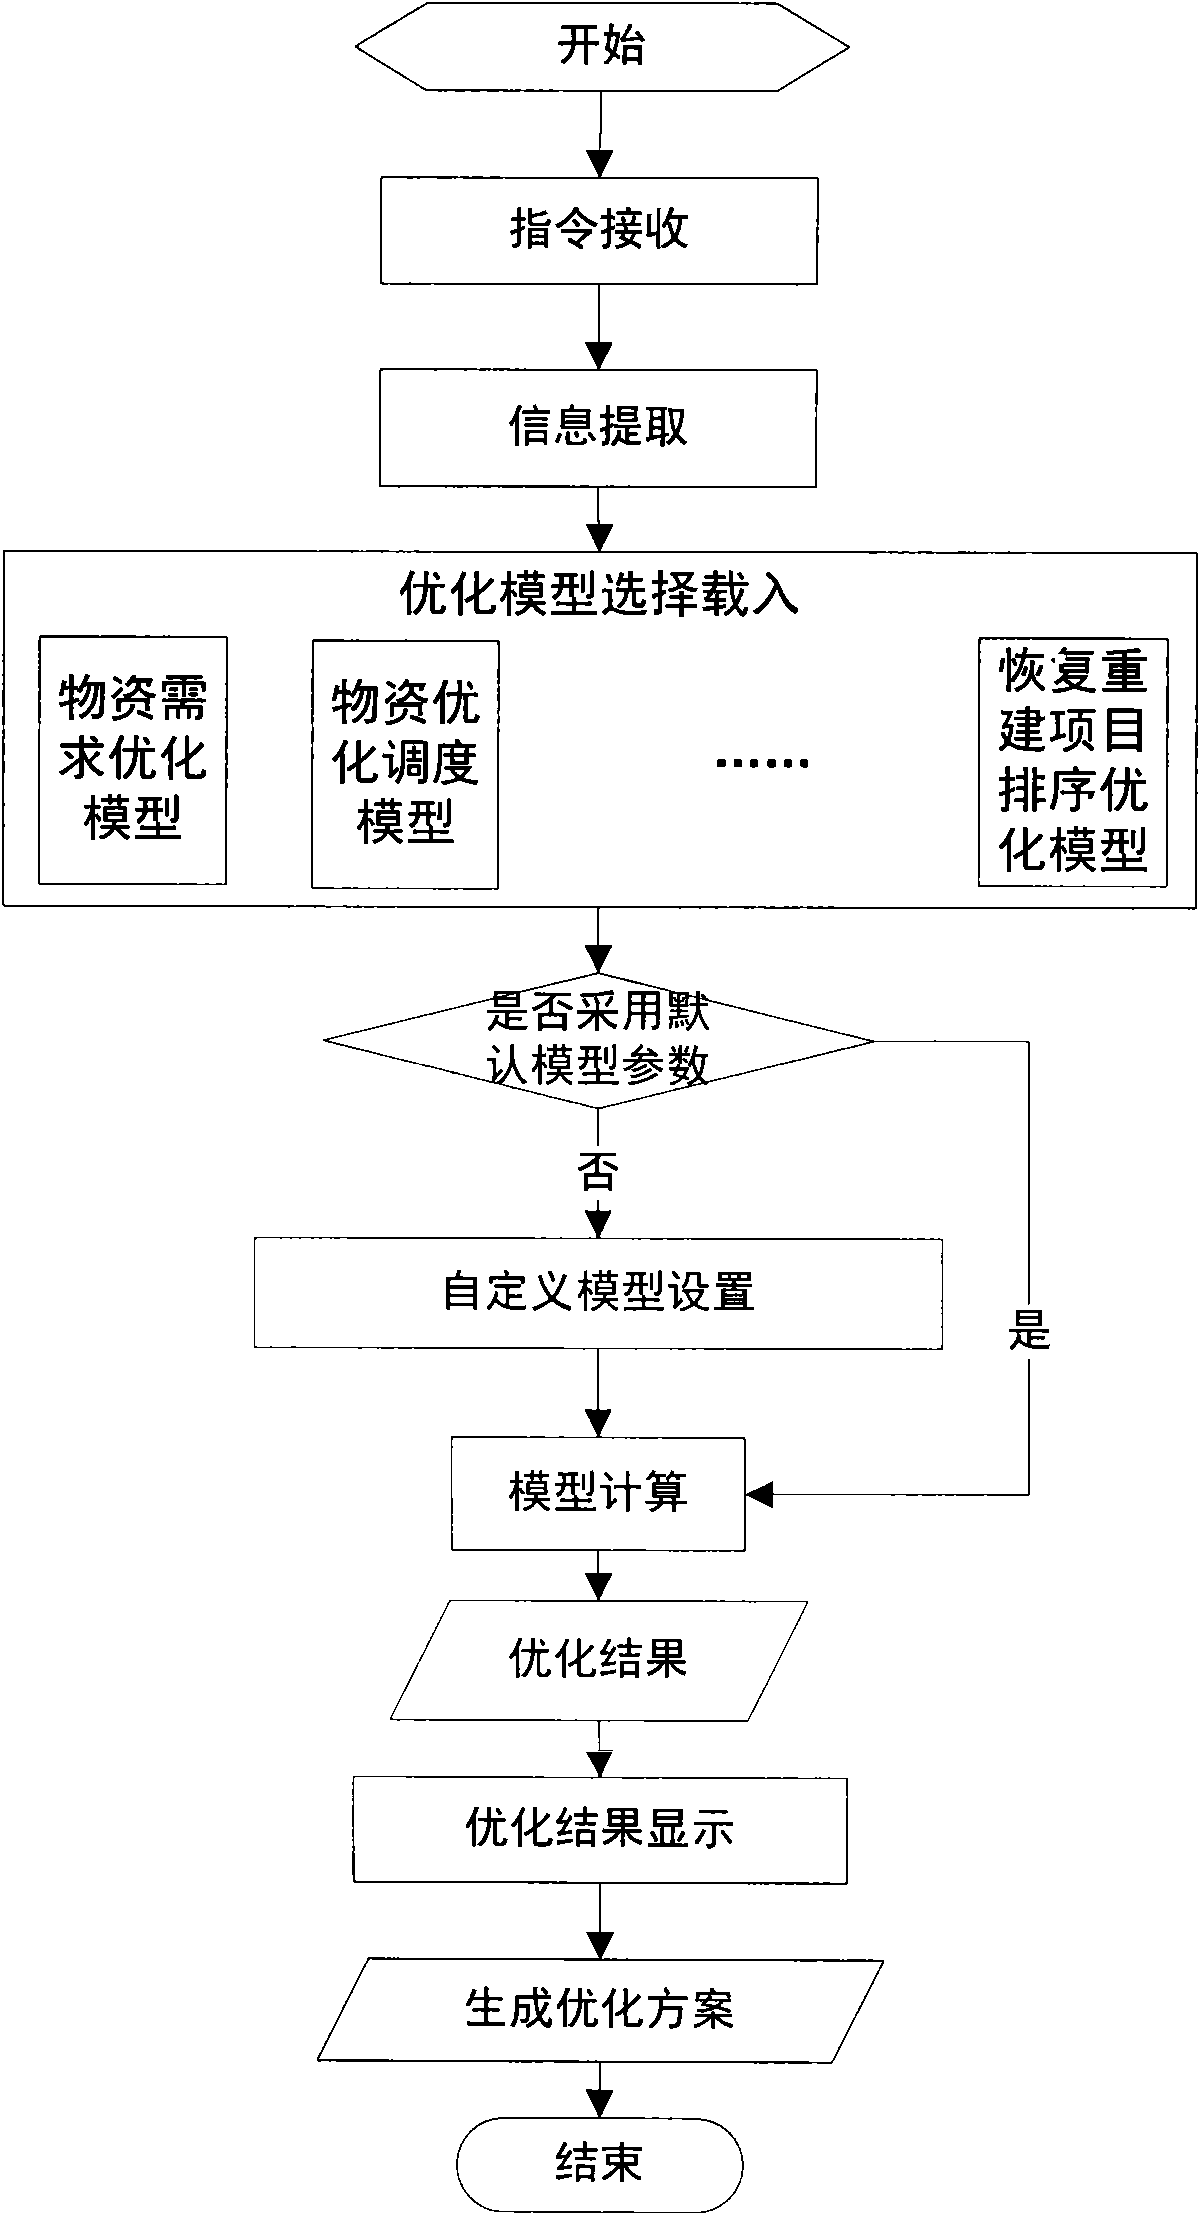 Method for optimizing and determining disaster-reduction decision scheme